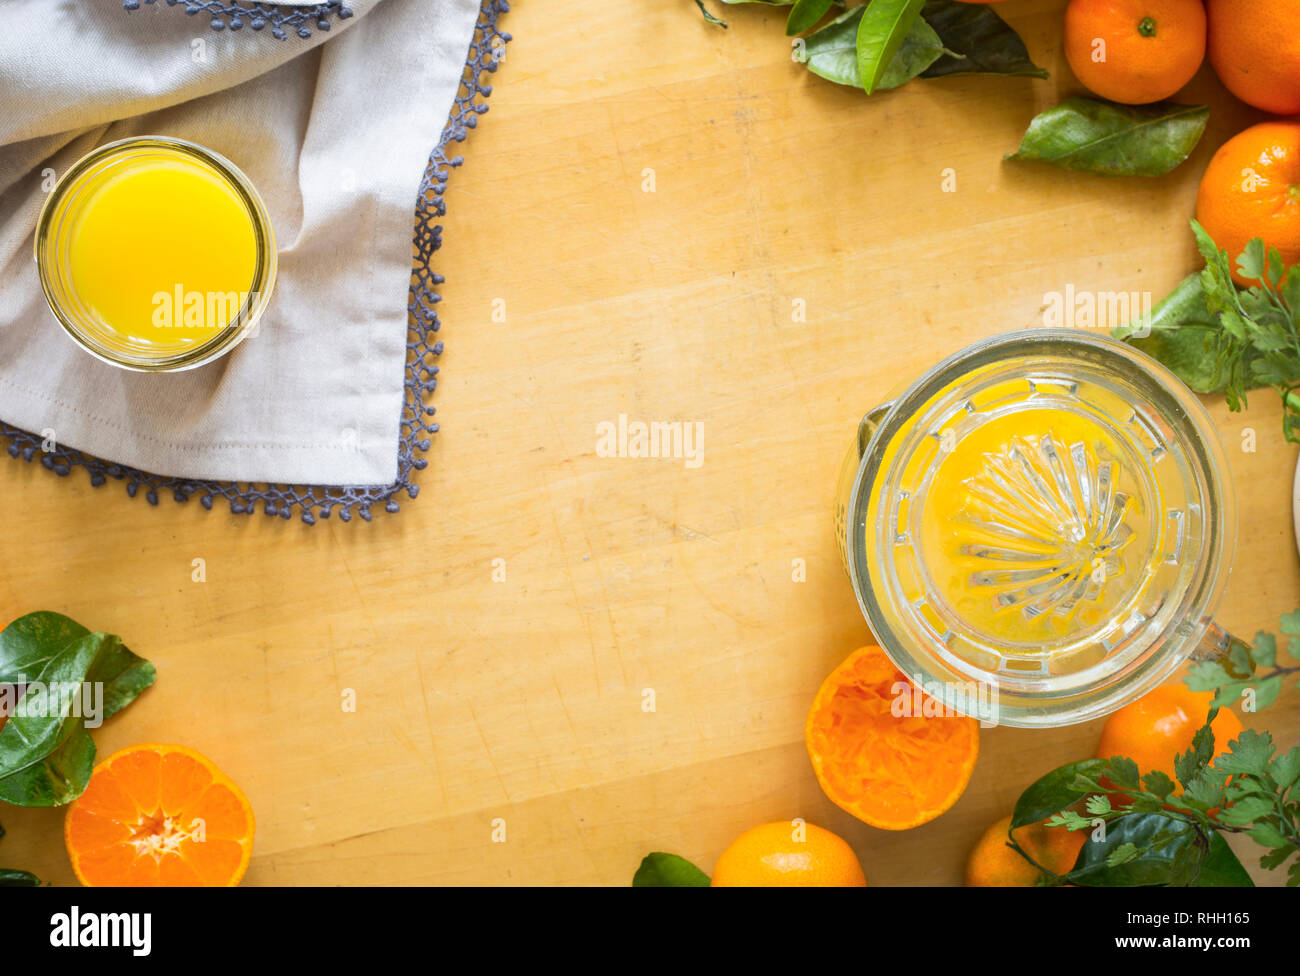 overhead view of glass of fresh squeezed orange juice with linens and oranges, with negative space for copy Stock Photo